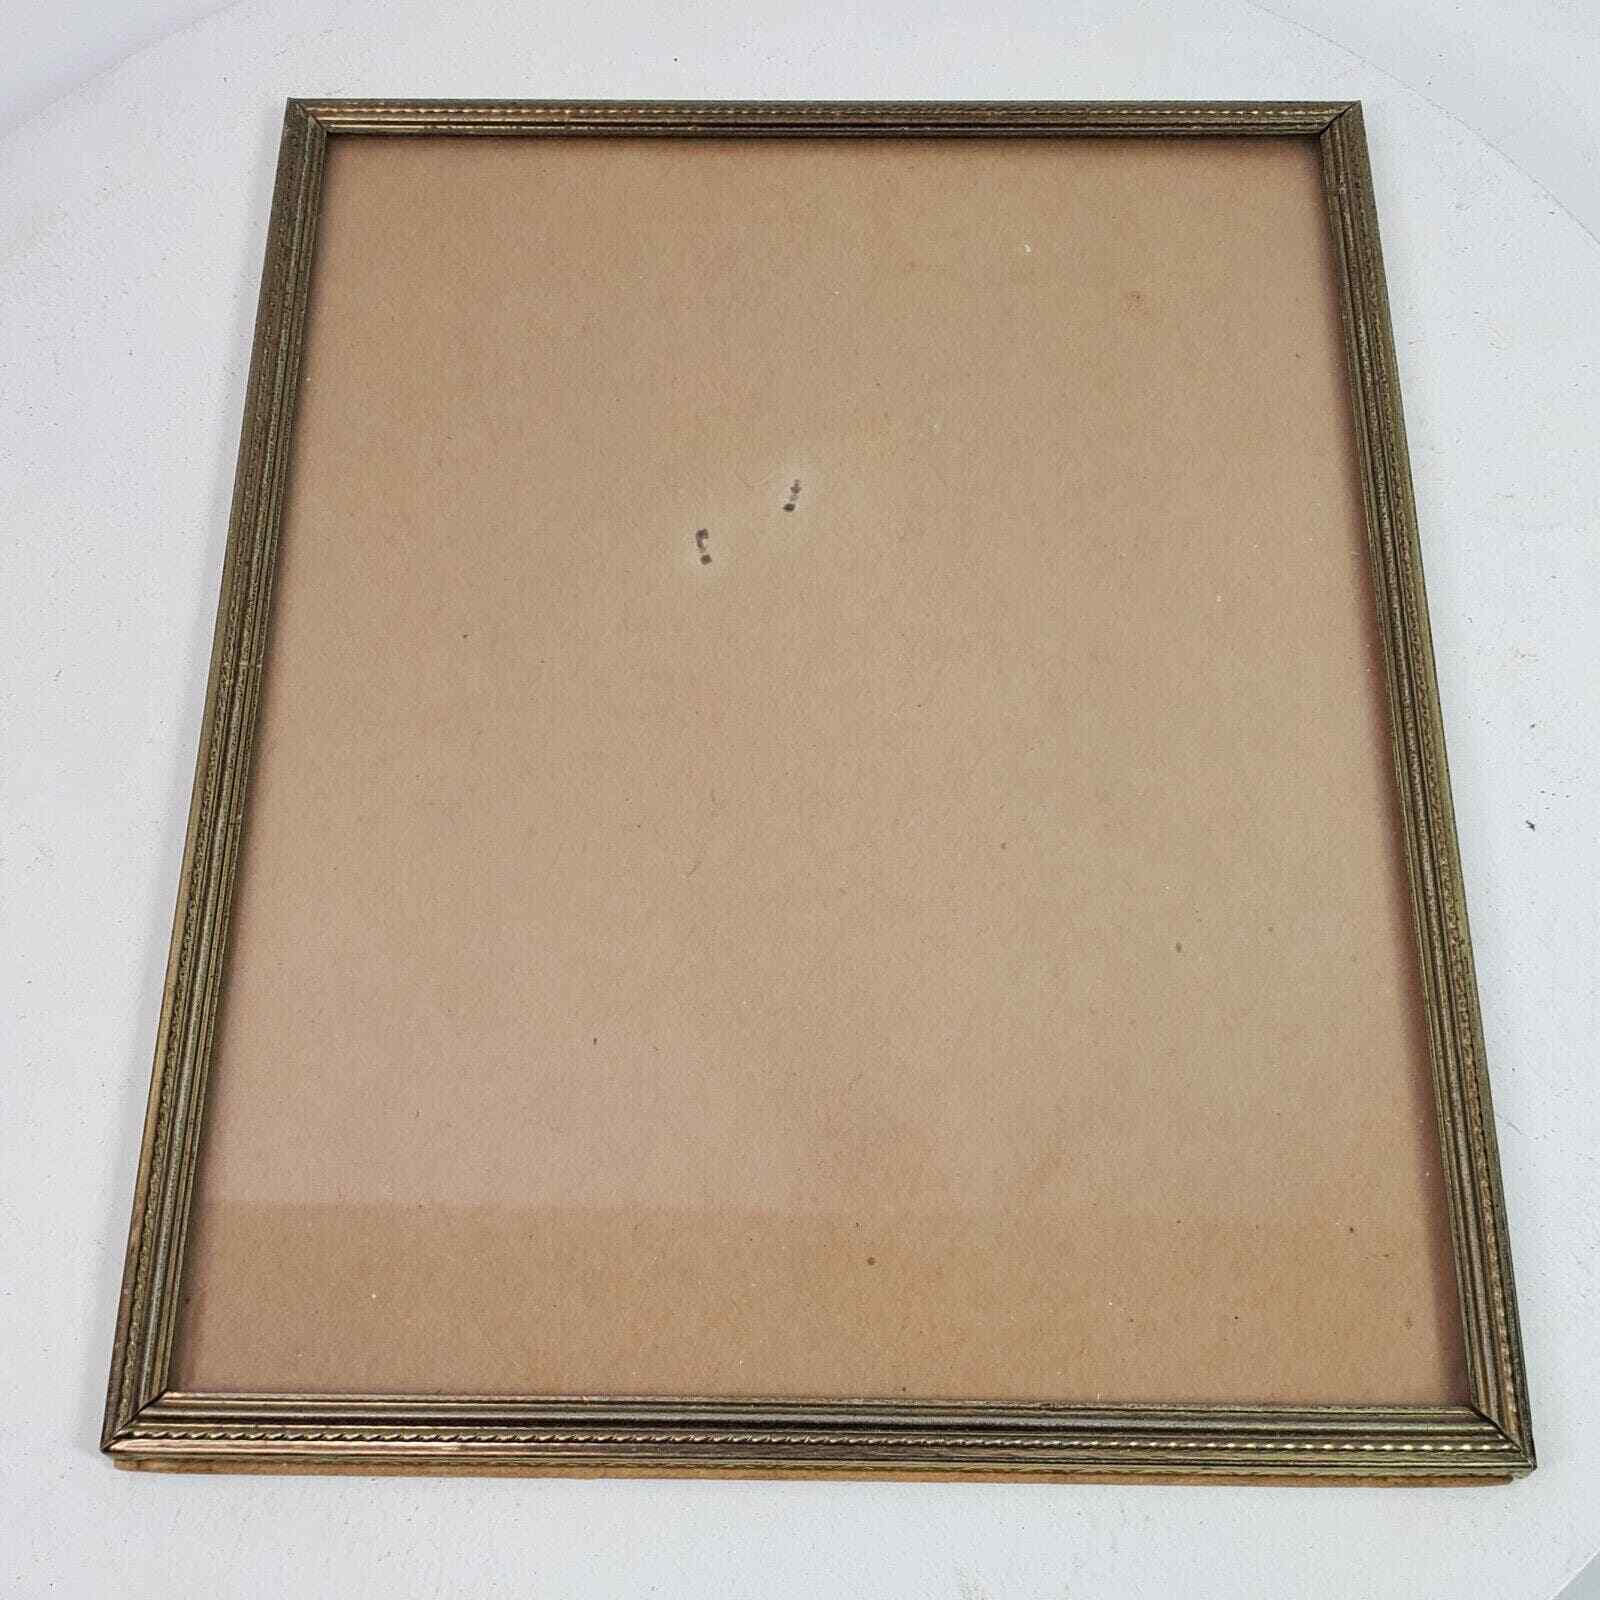 Vintage Mid Century Metal Frame 8x10 Inch Photo Picture No Hanger